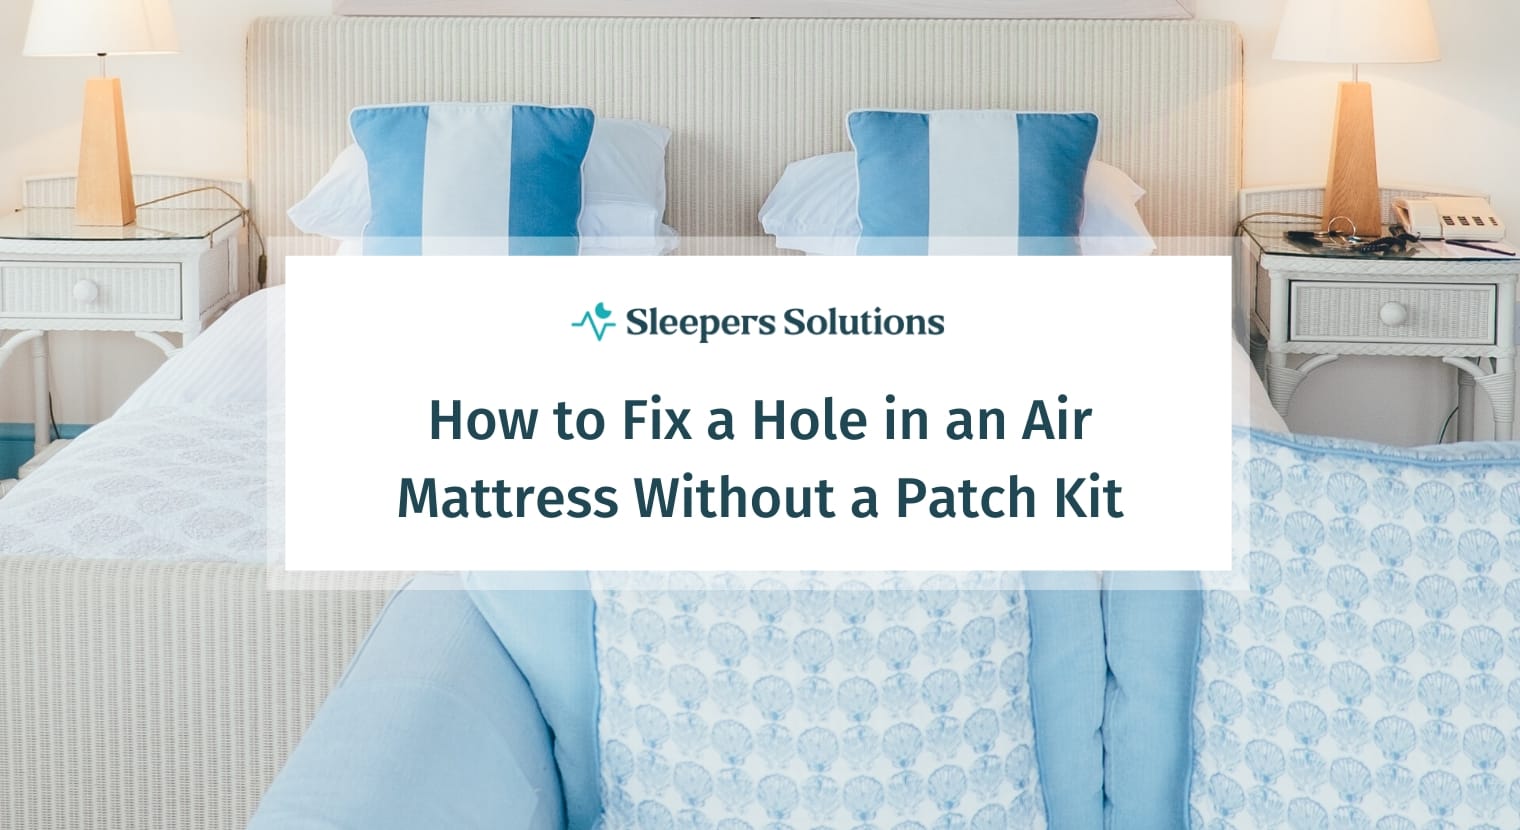 How to Fix a Hole in an Air Mattress Without a Patch Kit